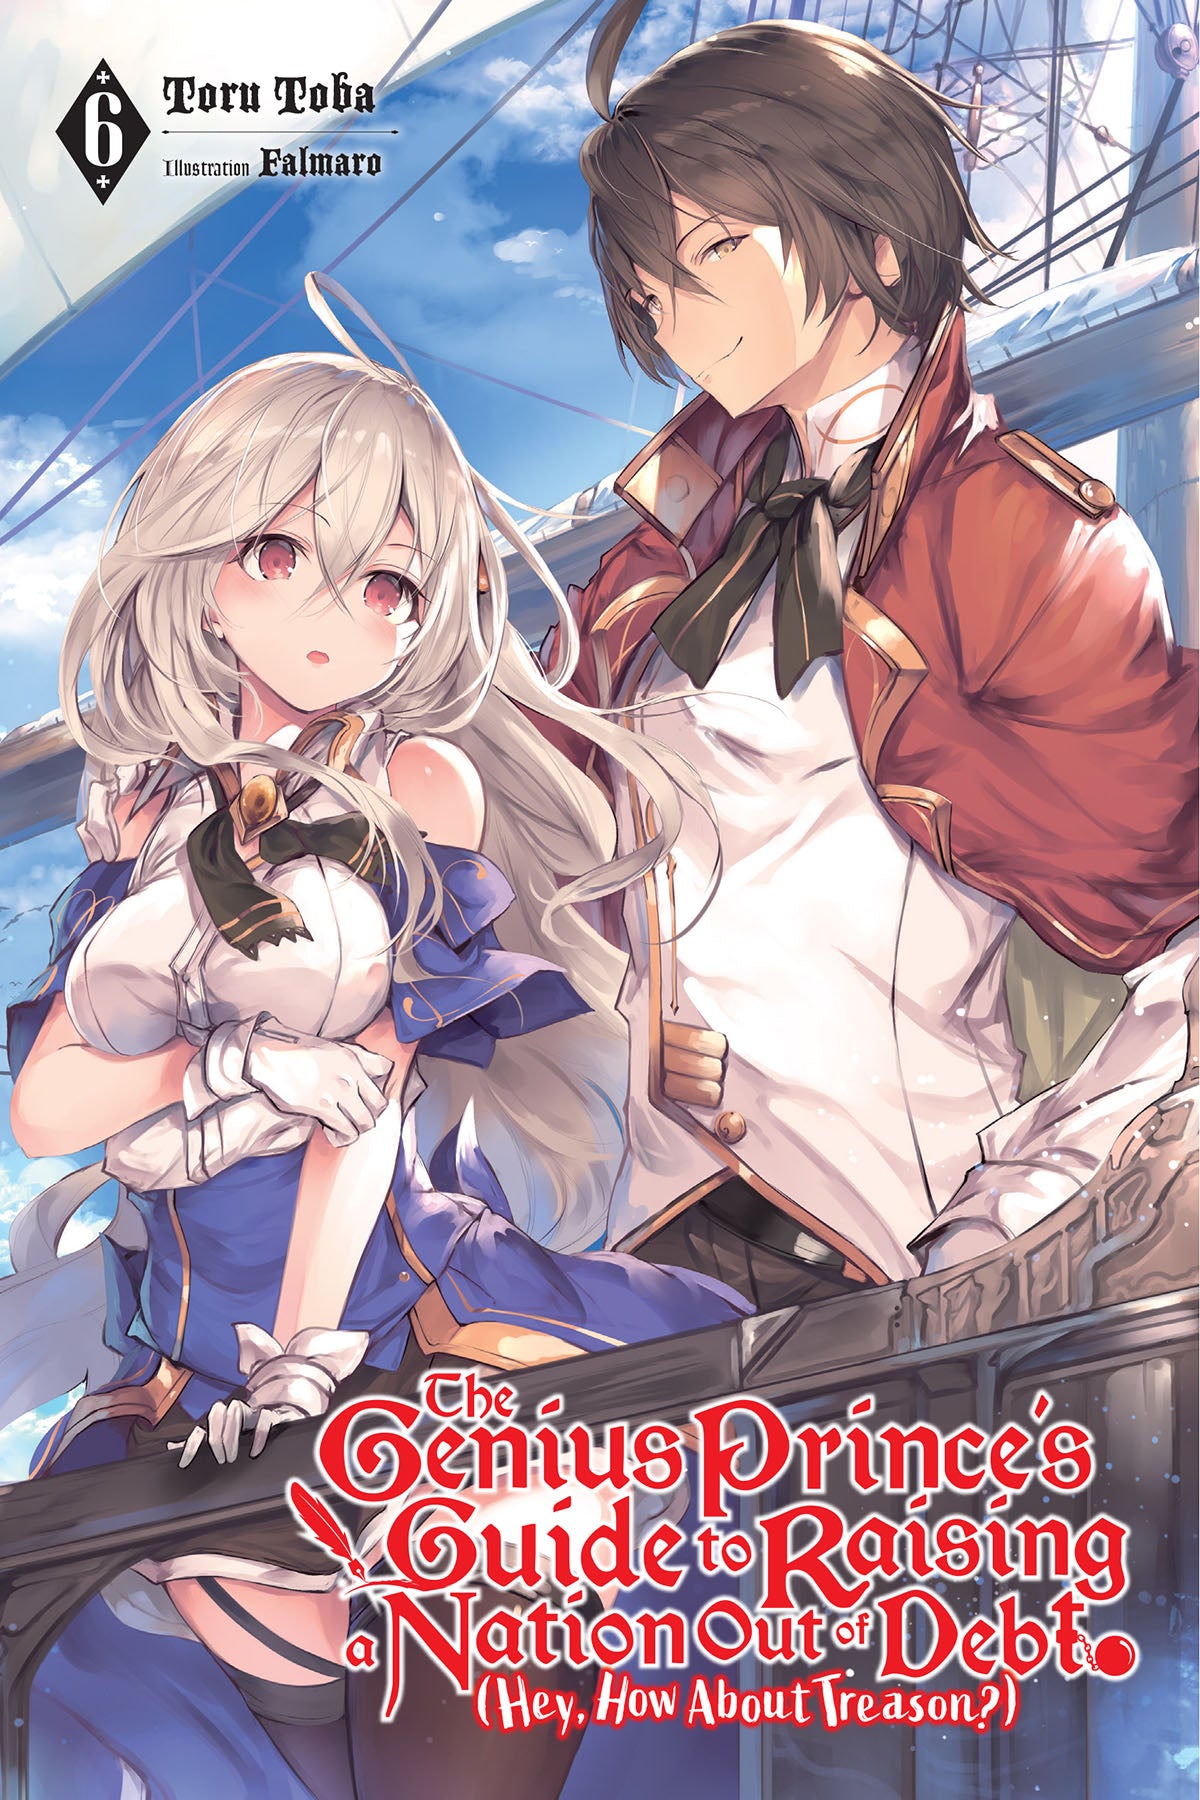 The Genius Prince's Guide to Raising a Nation Out of Debt (Hey, How about Treason?) Vol. 06 (Light Novel)